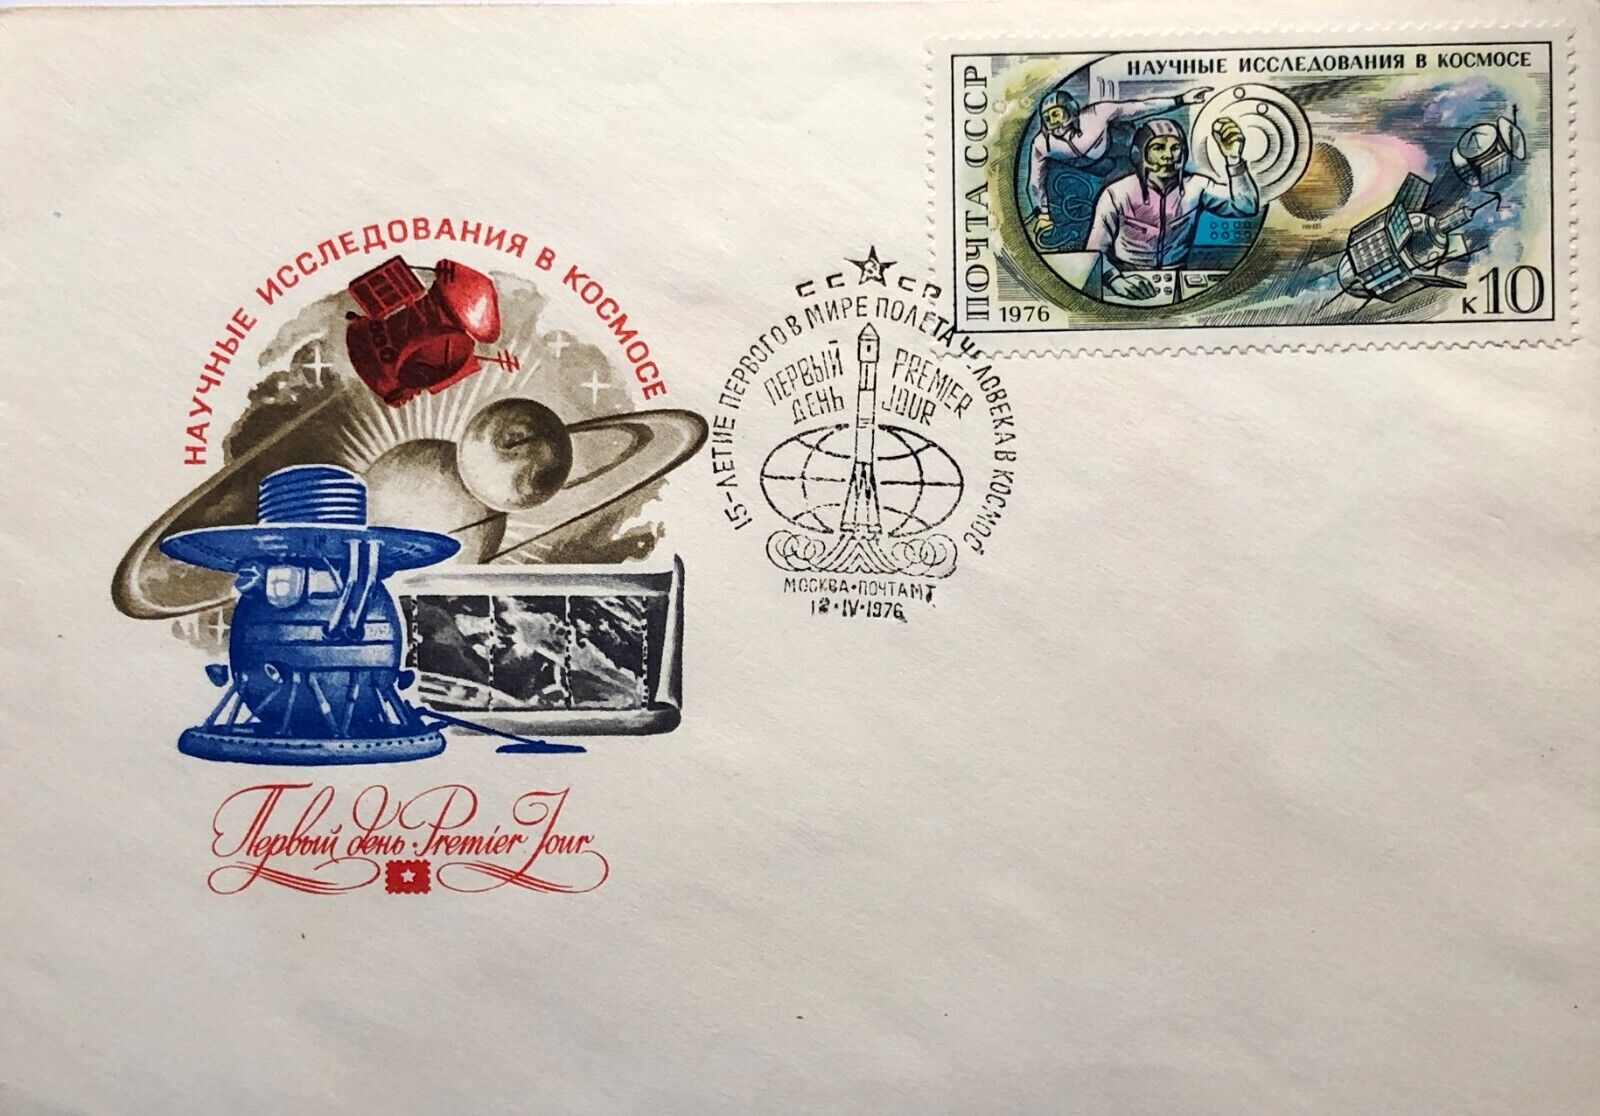 1976 Vintage Day 1 Envelope Scientific Research in Space Stamps